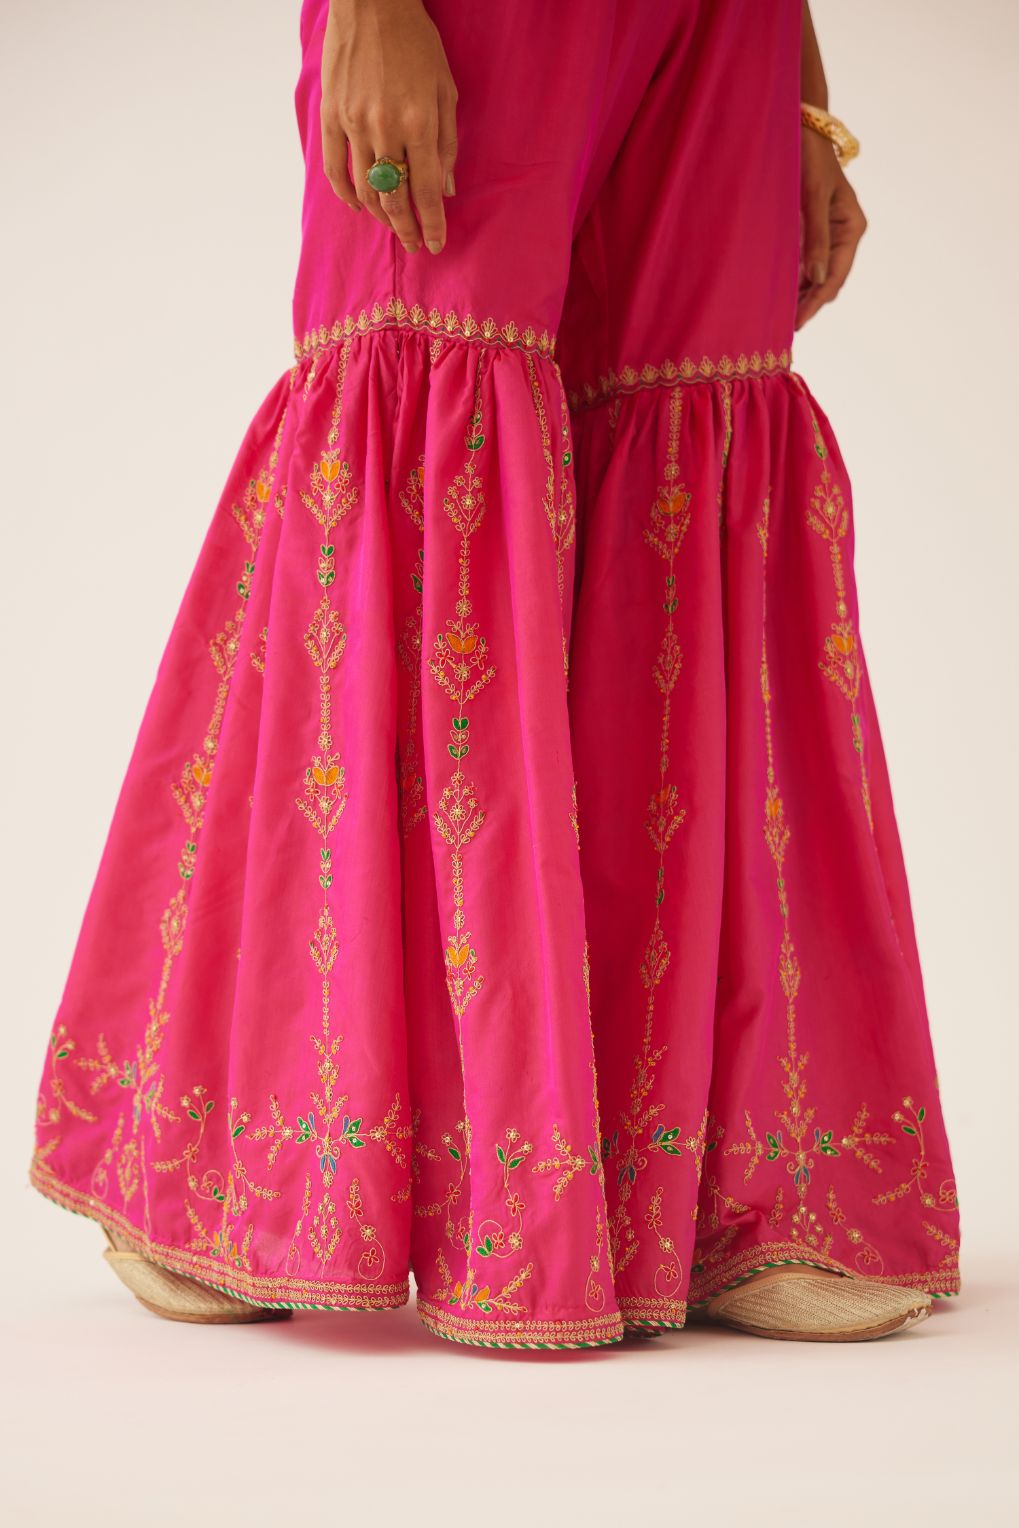 Raspberry silk farshi with delicate dori and silk thread embroidery, highlighted with dori embroidery at knee joint seam.